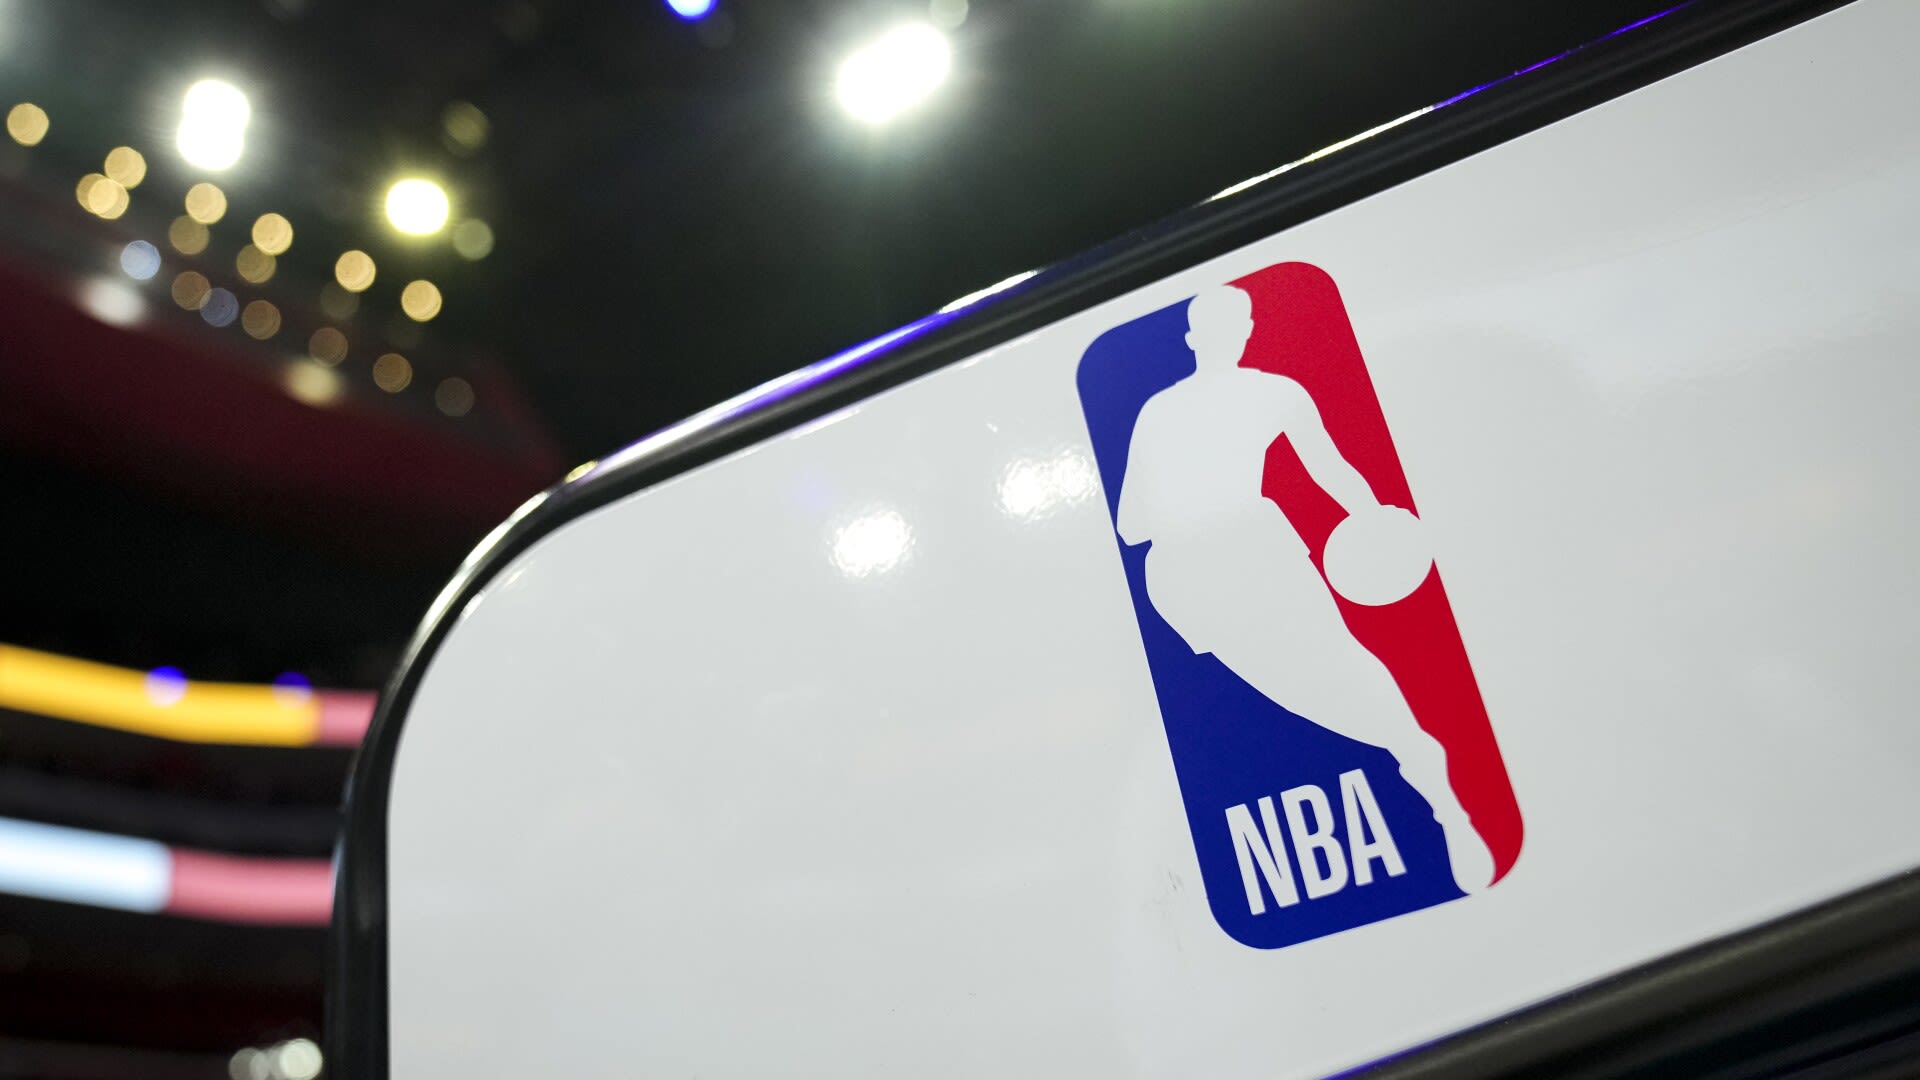 NBA, WNBA return to NBC with 11-year deal for regular season, playoff coverage